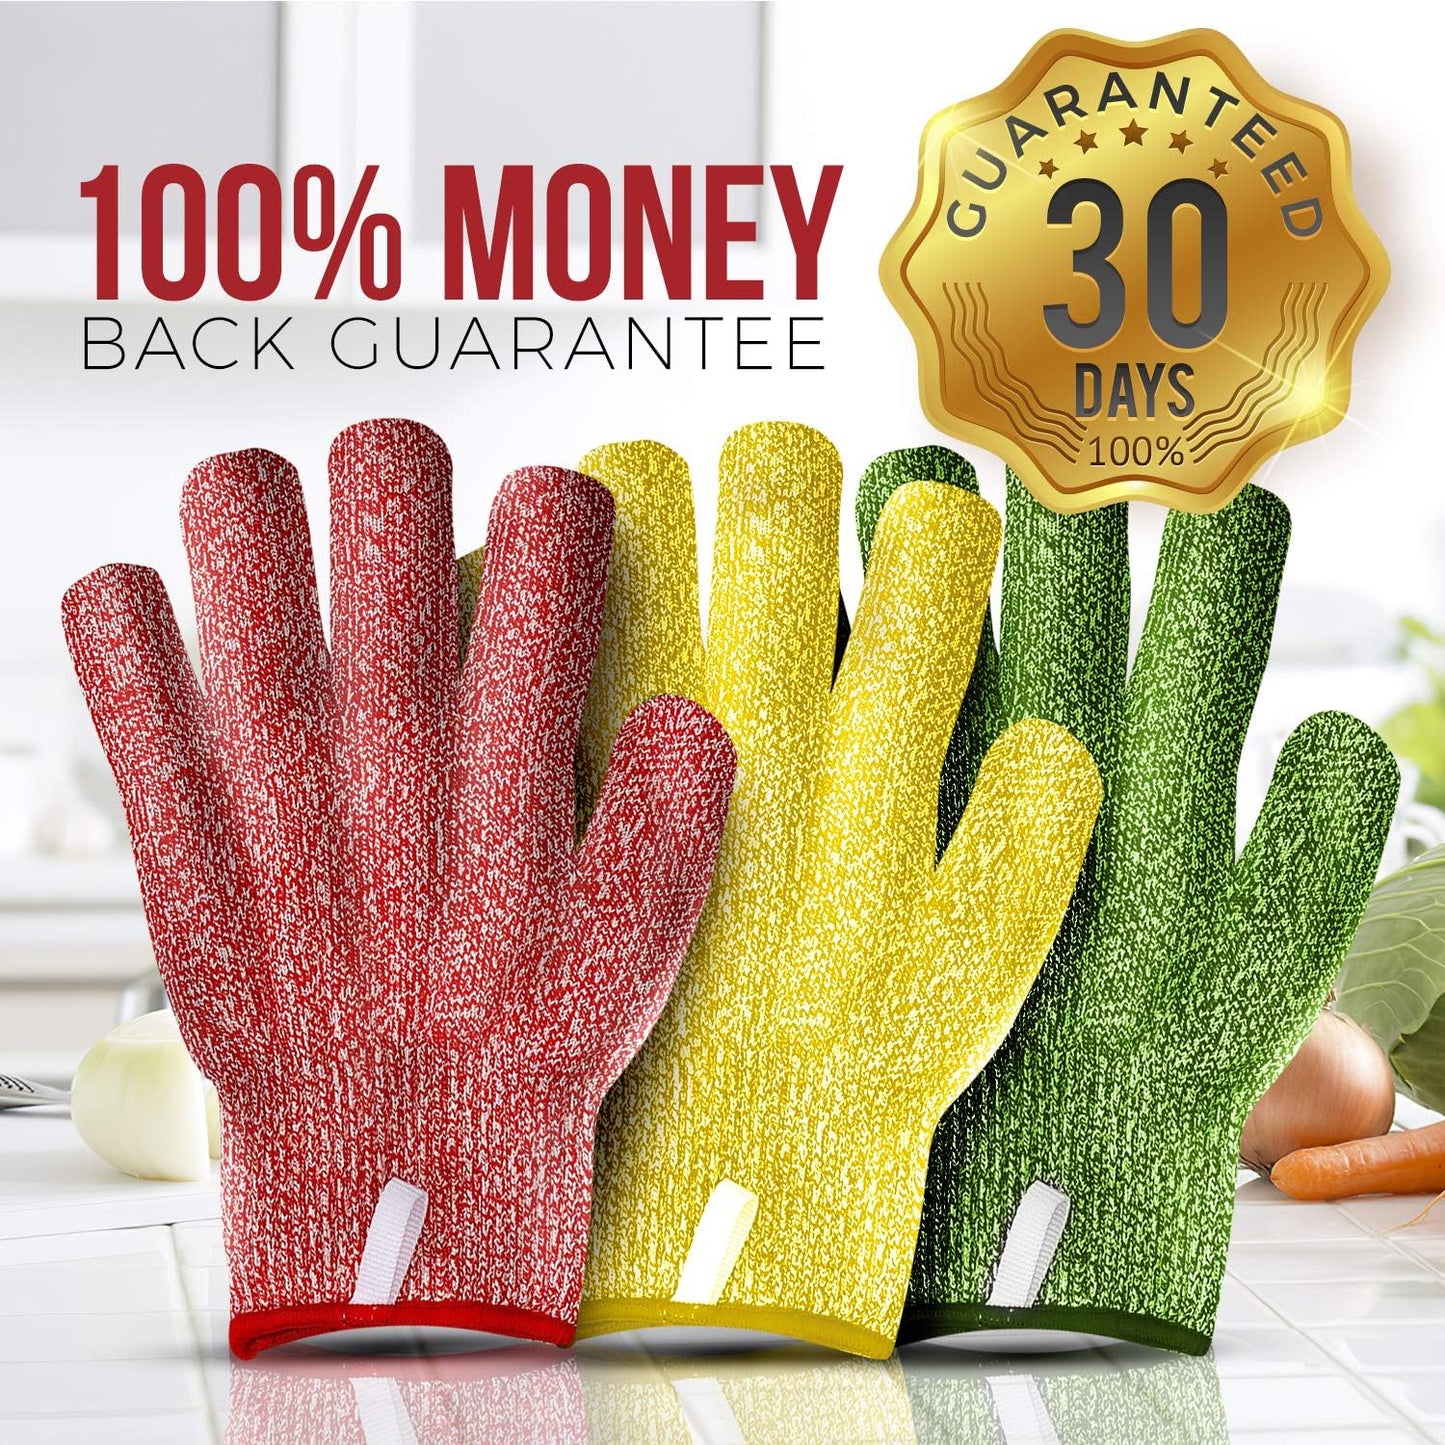 TruChef Cut Resistant Gloves - 3 Pack, Food Grade, Fits both hands, Level 5 Protection